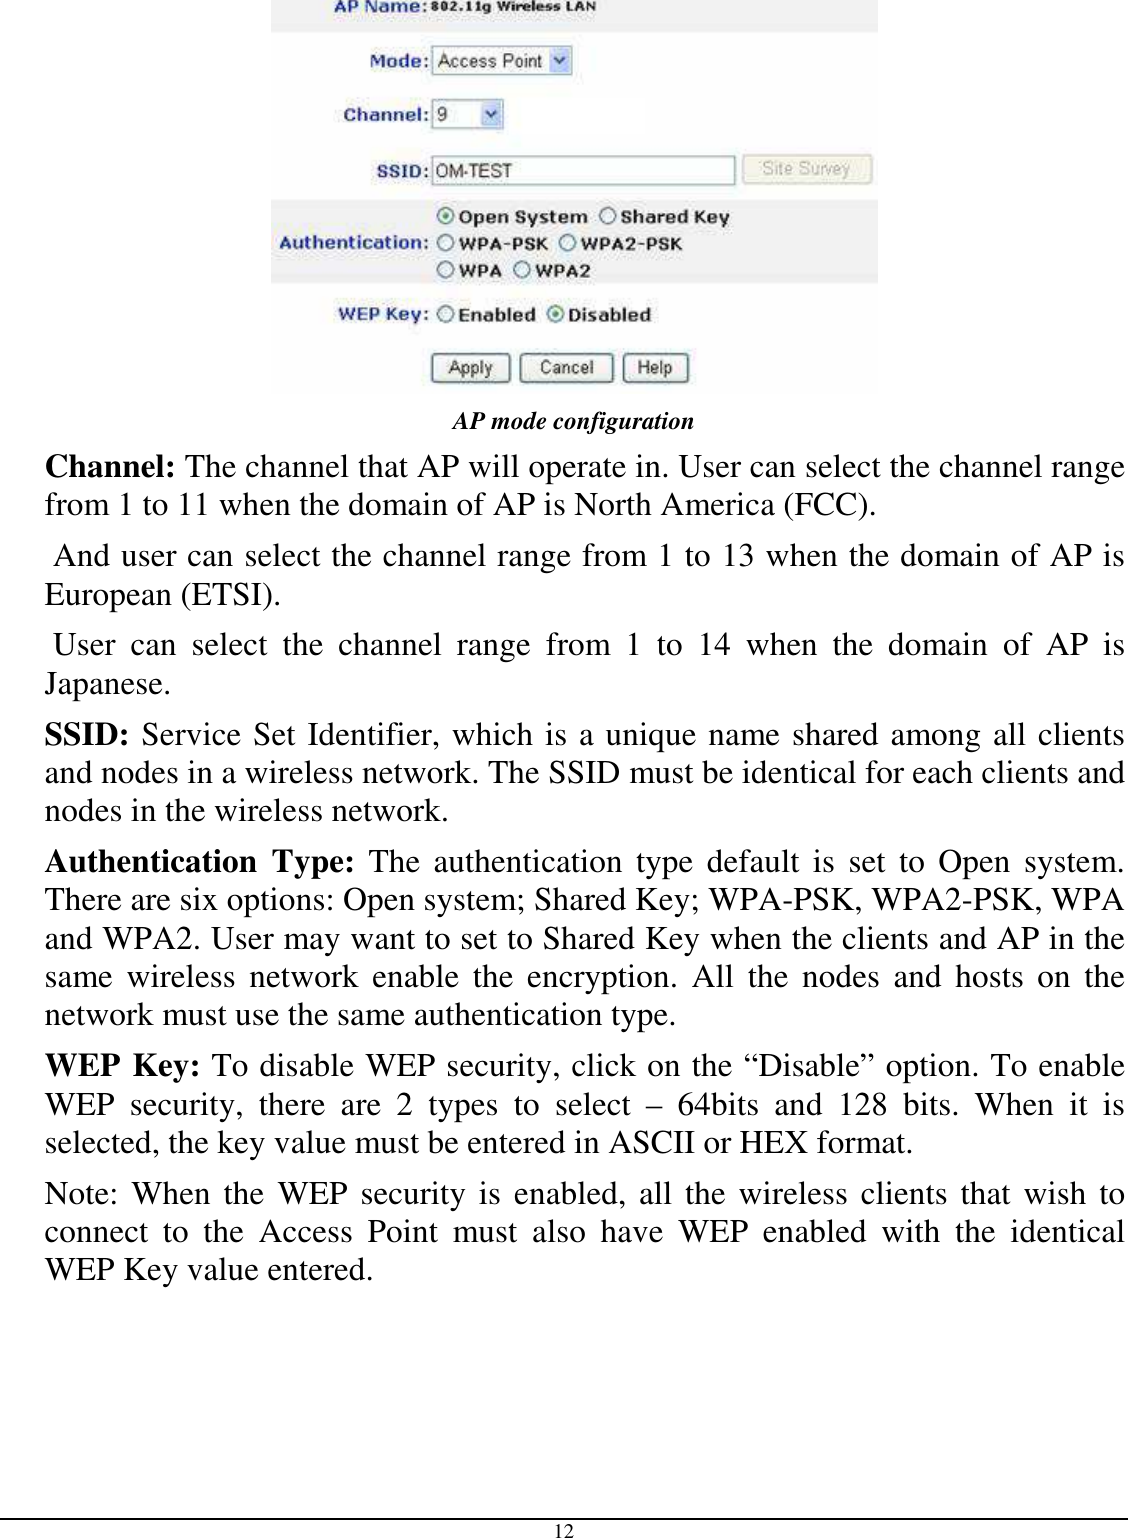  12  AP mode configuration Channel: The channel that AP will operate in. User can select the channel range from 1 to 11 when the domain of AP is North America (FCC).  And user can select the channel range from 1 to 13 when the domain of AP is European (ETSI).  User  can  select  the  channel  range  from  1  to  14  when  the  domain  of  AP  is Japanese. SSID: Service Set Identifier, which is a unique name shared among all clients and nodes in a wireless network. The SSID must be identical for each clients and nodes in the wireless network. Authentication  Type:  The authentication  type  default  is  set  to  Open  system.  There are six options: Open system; Shared Key; WPA-PSK, WPA2-PSK, WPA and WPA2. User may want to set to Shared Key when the clients and AP in the same  wireless  network  enable  the  encryption.  All  the  nodes  and  hosts on  the network must use the same authentication type.   WEP Key: To disable WEP security, click on the “Disable” option. To enable WEP  security,  there  are  2  types  to  select  –  64bits  and  128  bits.  When  it  is selected, the key value must be entered in ASCII or HEX format. Note: When the  WEP security is enabled, all the wireless clients that  wish to connect  to  the  Access  Point  must  also  have  WEP  enabled  with  the  identical WEP Key value entered. 